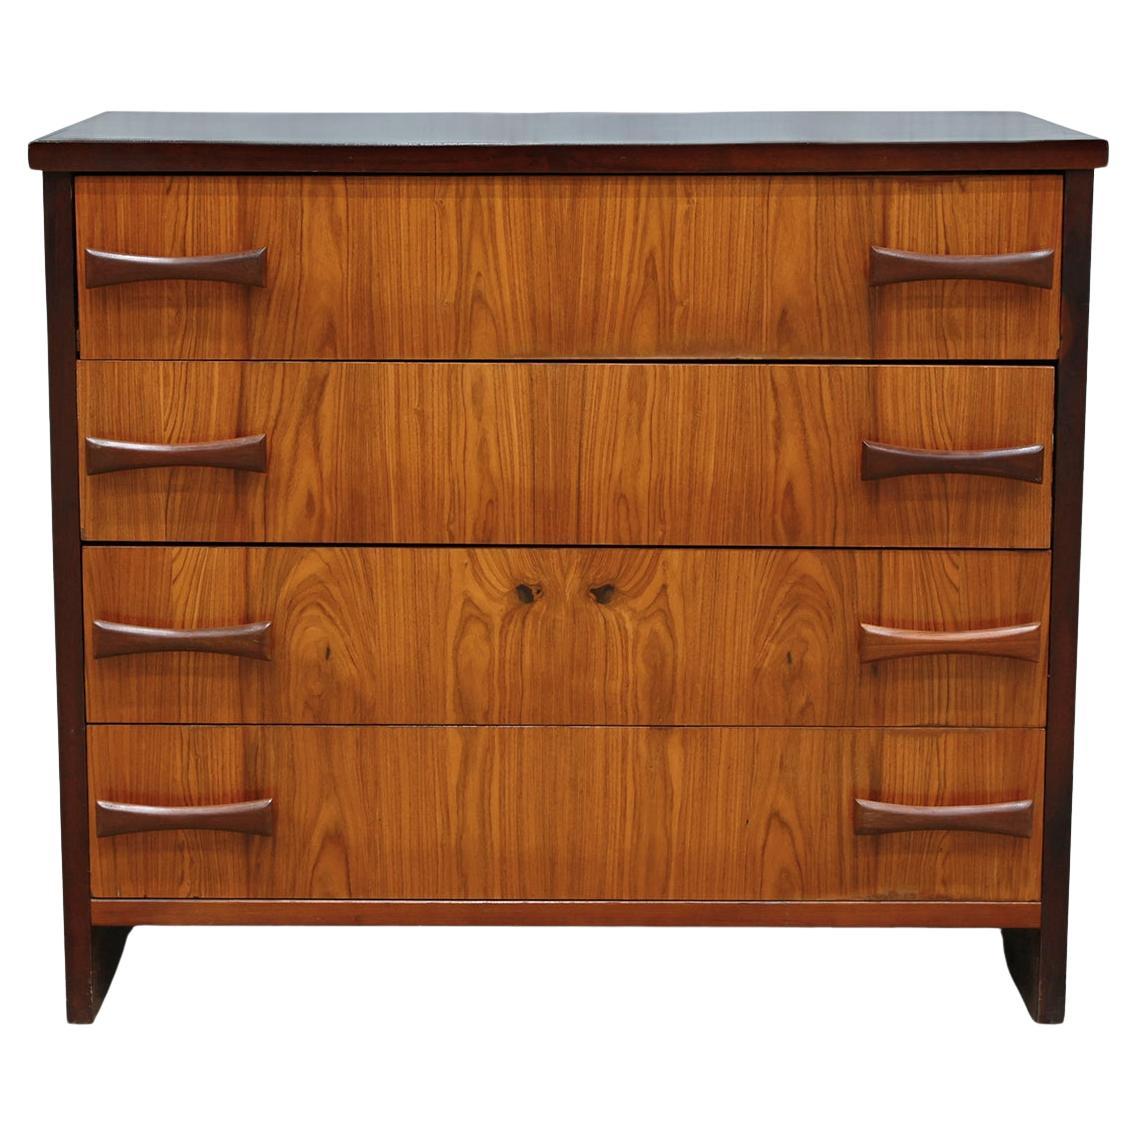 Mid-Century Modern Chest of Drawers in Caviuna wood, Unknown, c. 1950 For Sale